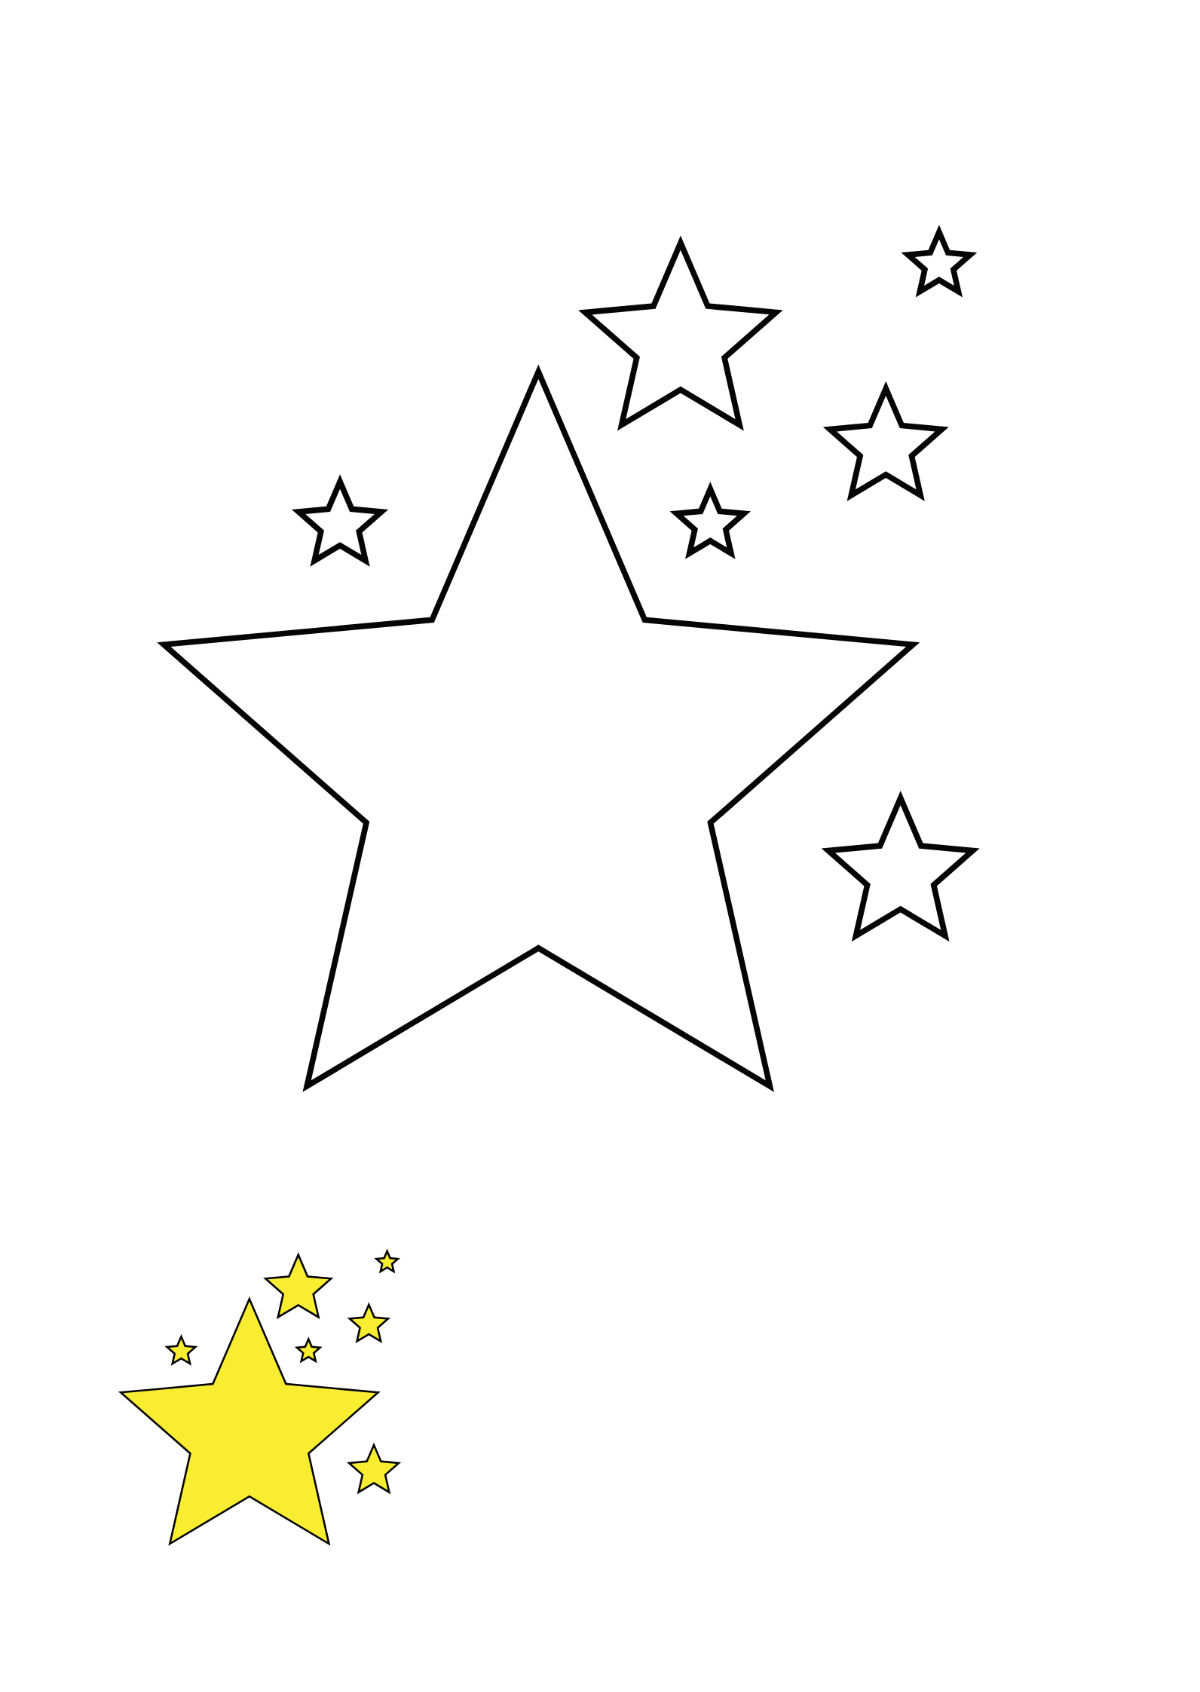 Star Sparkle coloring page Template